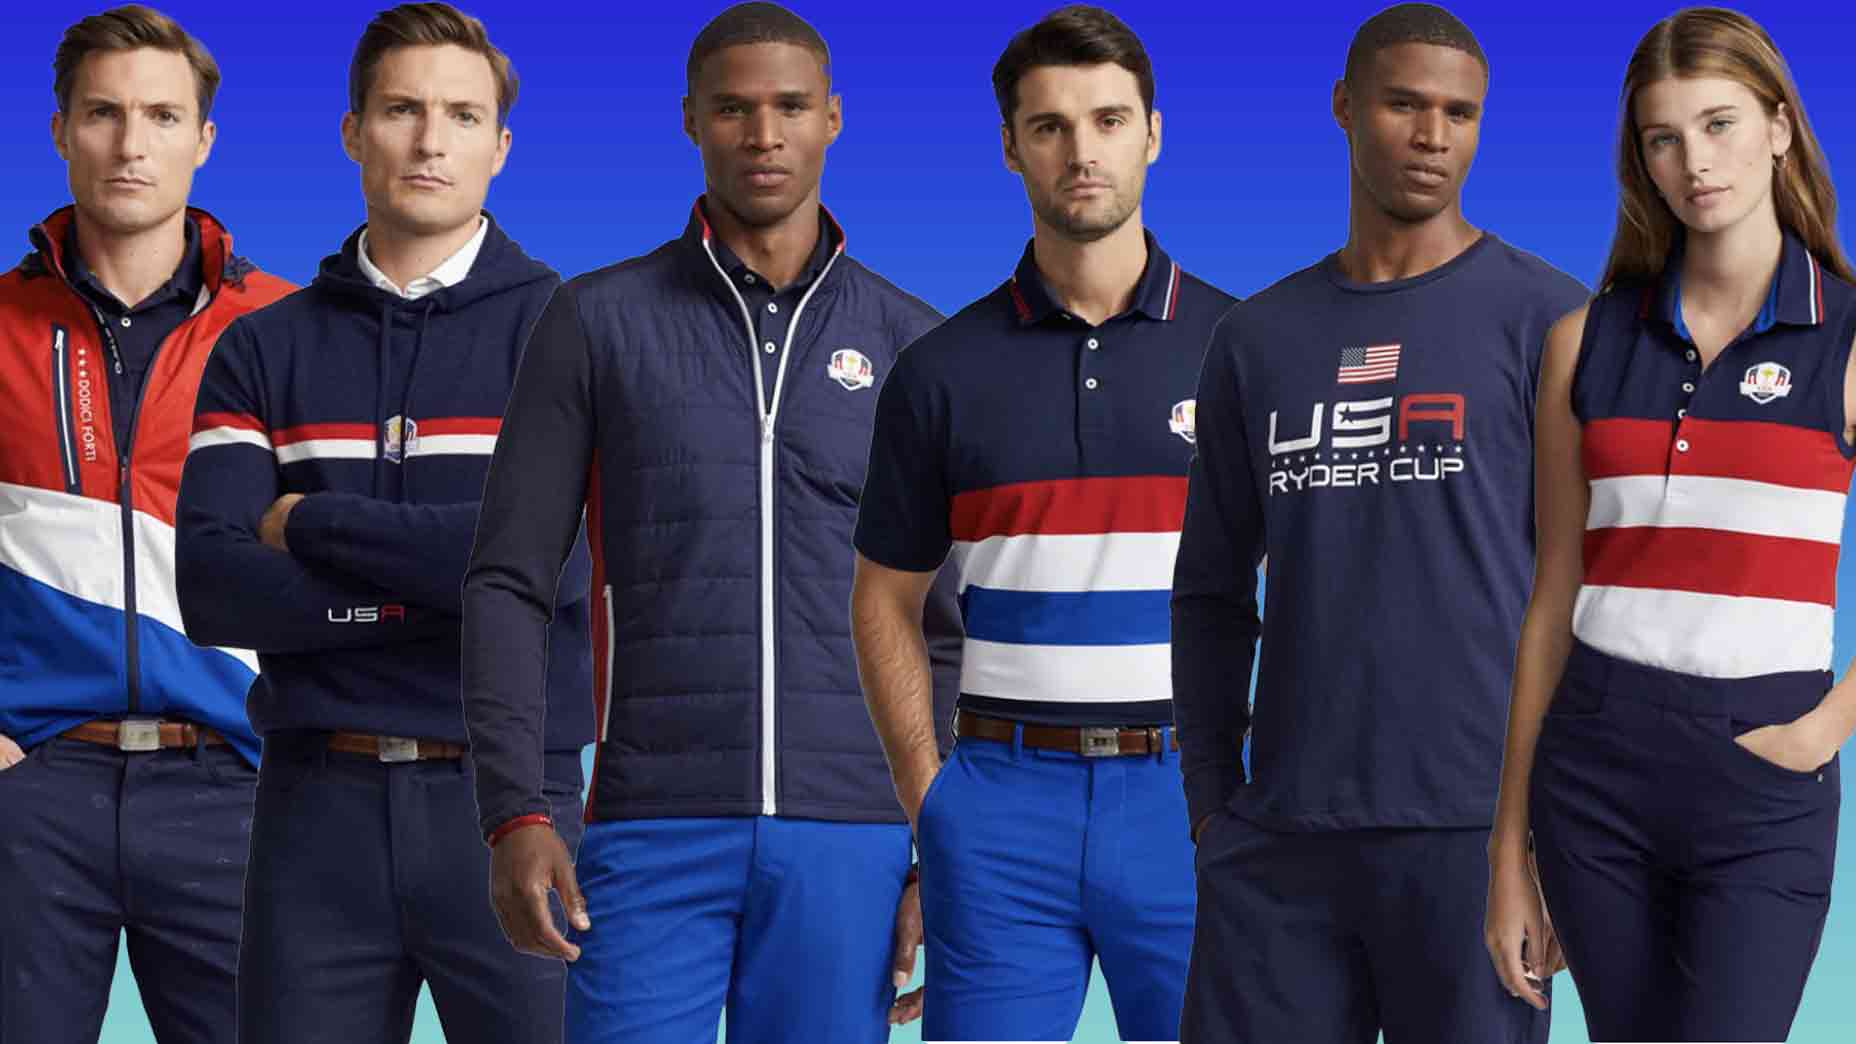 Ralph Lauren's Ryder Cup collection just dropped. Shop our 10 favorite